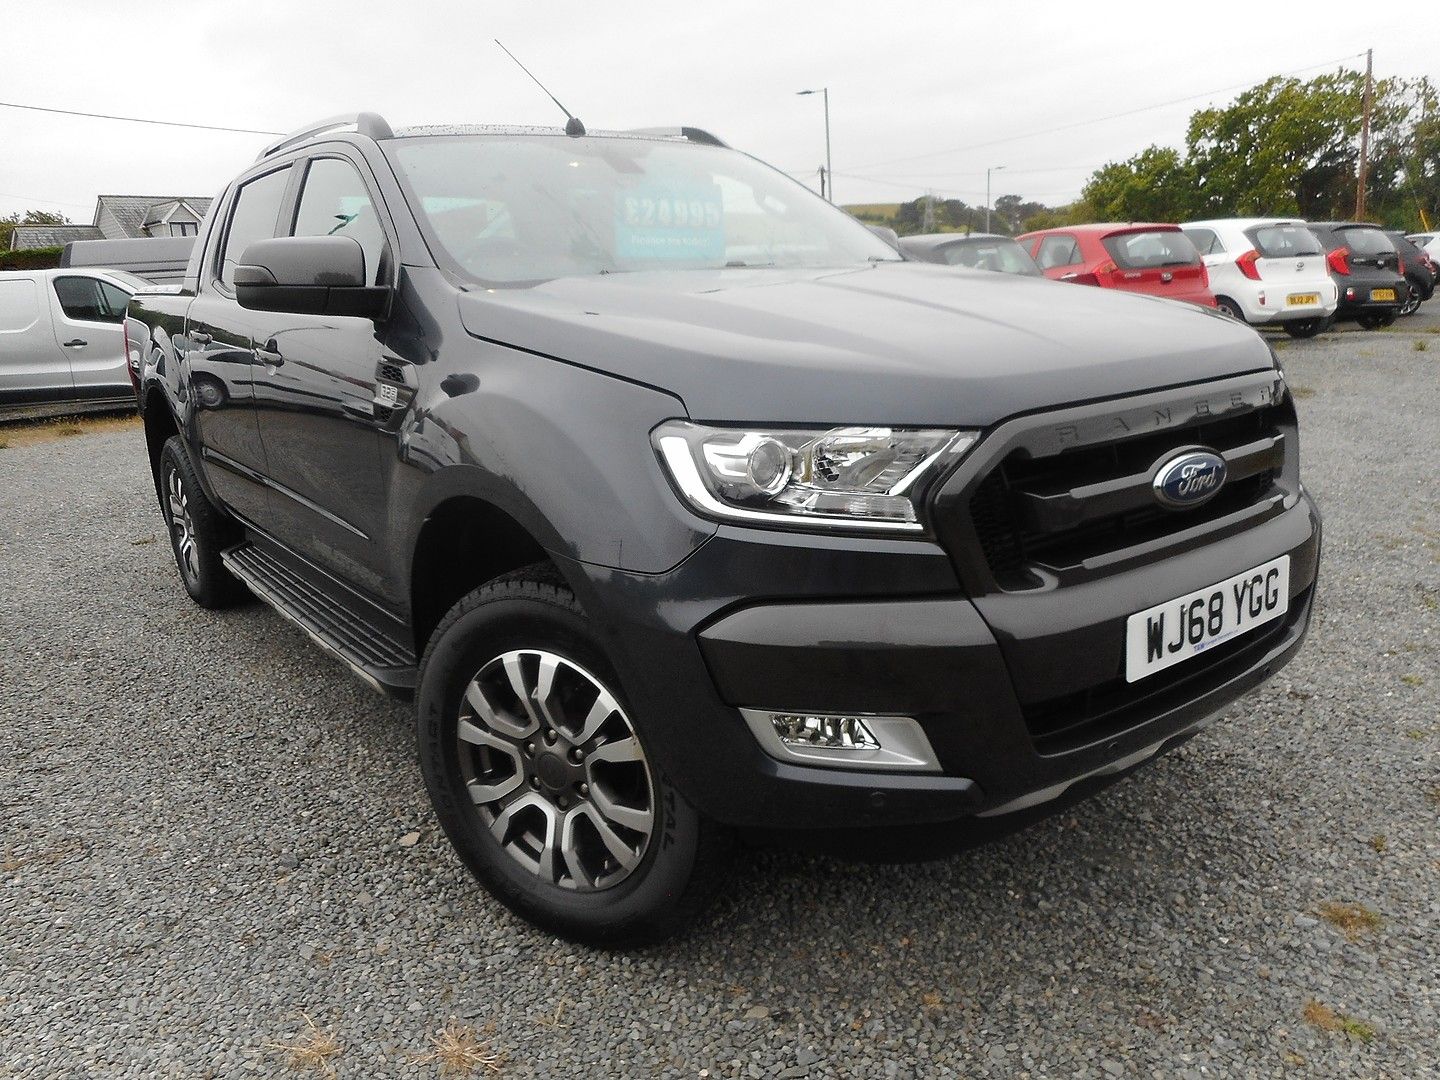 FORD Ranger Double Cab 4x4 Wildtrak 3.2TDCi 200PS (2018) - Picture 2